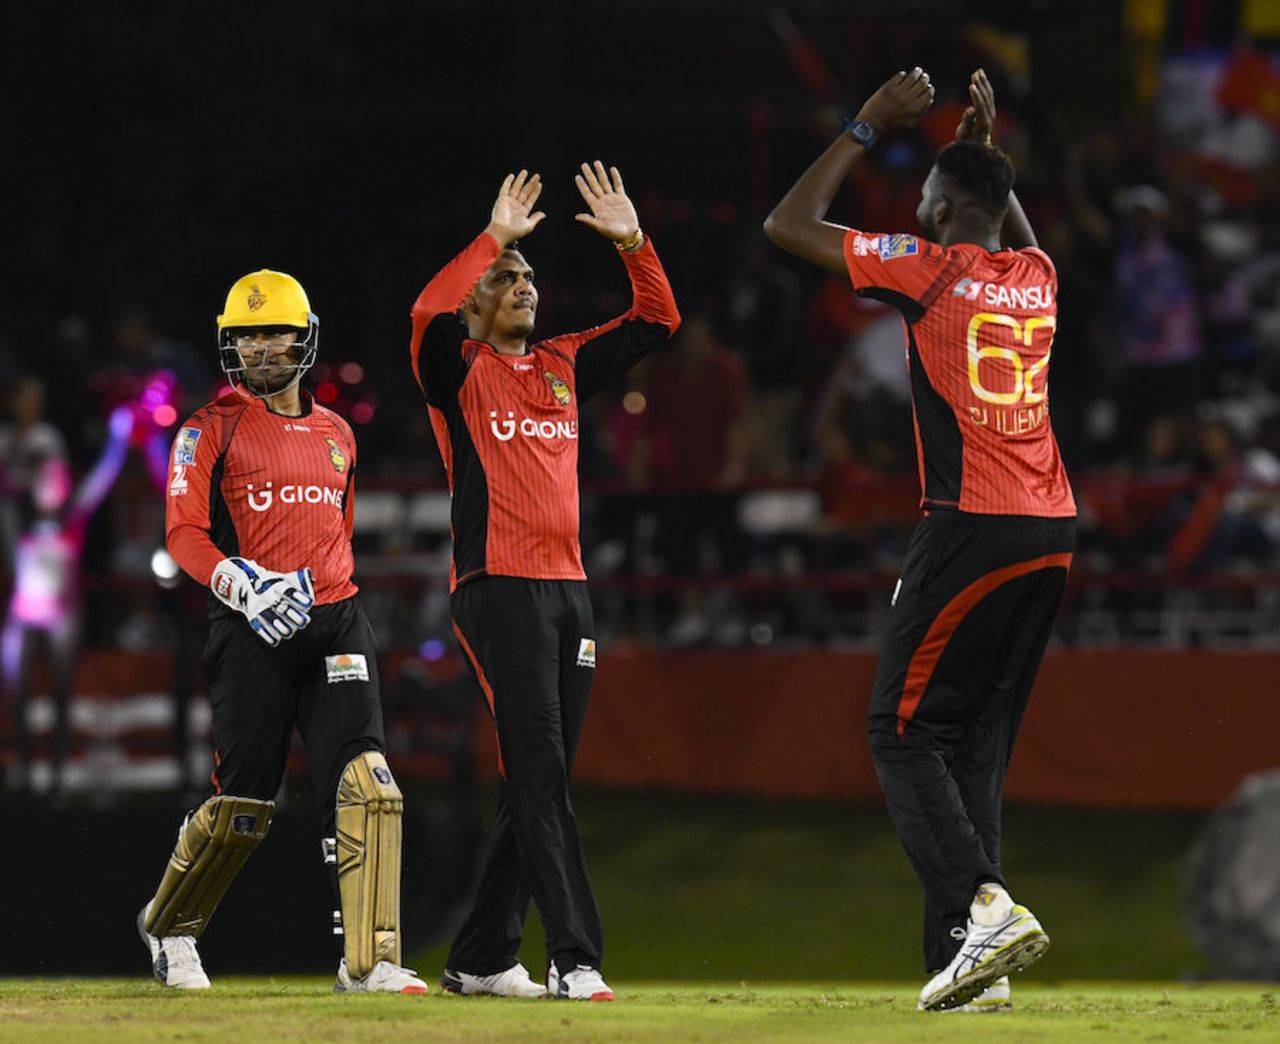 Sunil Narine took a wicket and conceded only nine runs in his four overs, Trinbago Knight Riders v Jamaica Tallawahs, CPL 2016, Port of Spain, July 4, 2016